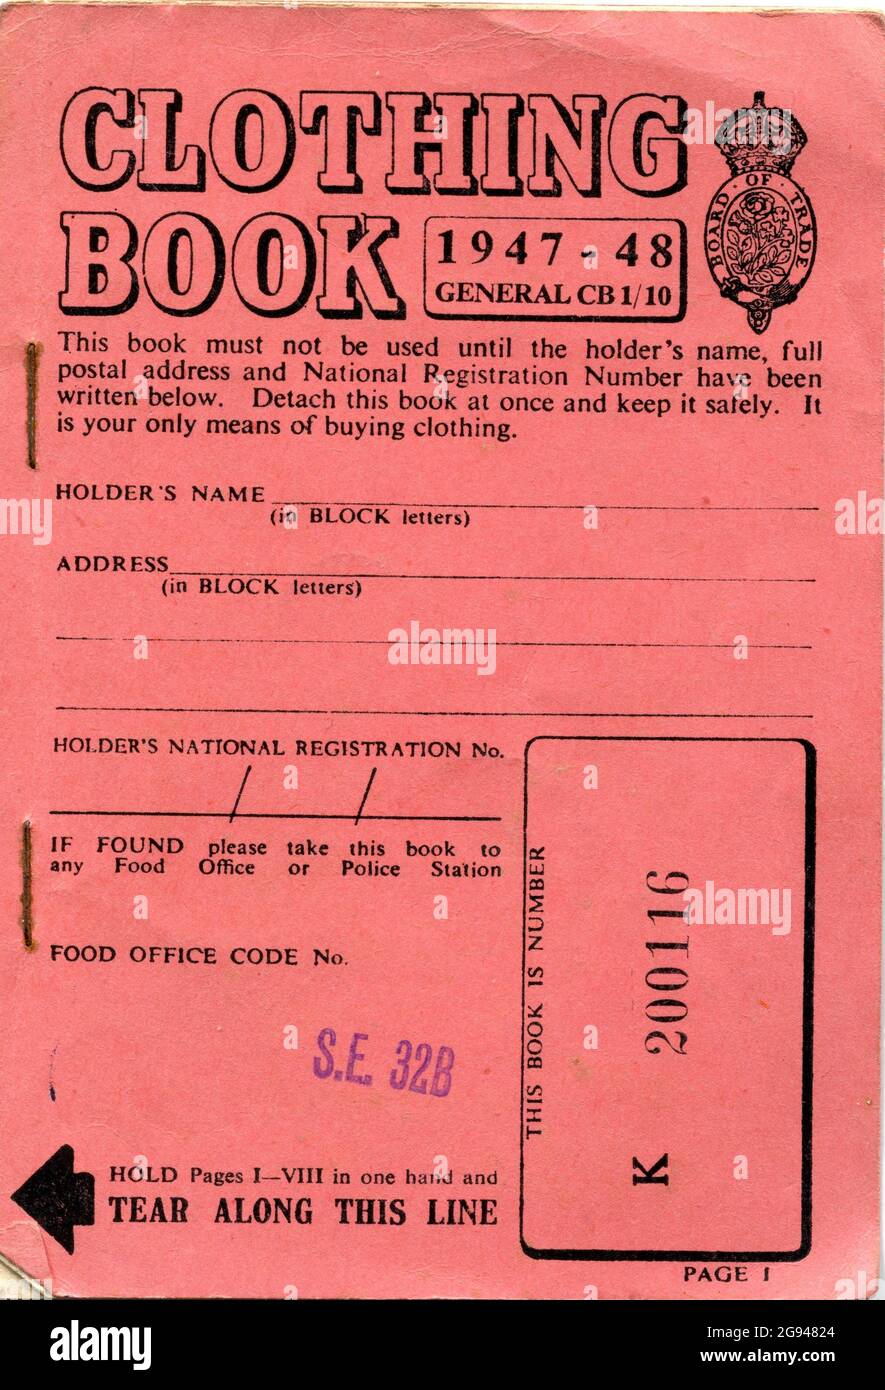 A British clothing ration coupon book. Introduced in 1941 during the Second World War, clothes rationing ended in 1949. Stock Photo